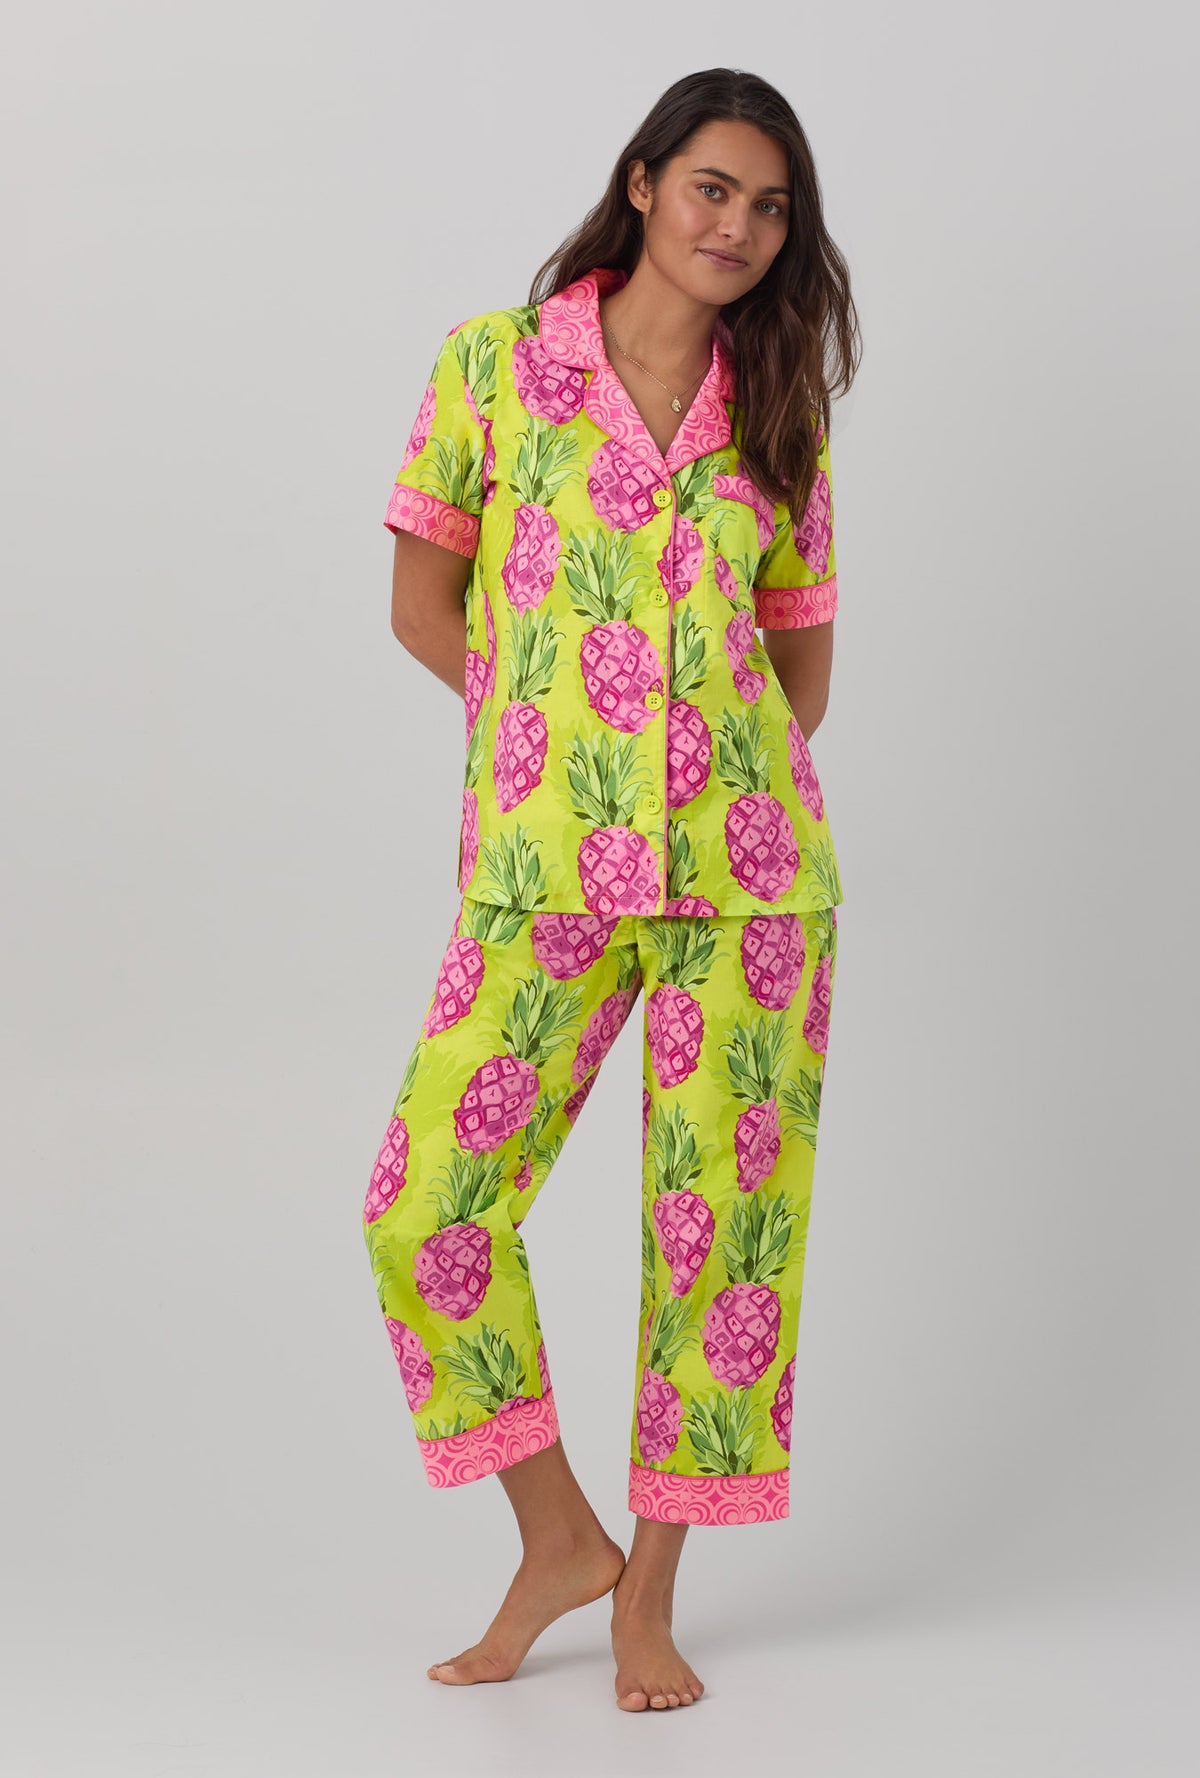 A lady wearing short sleeve classic cropped pj set with kiwi pineapple print